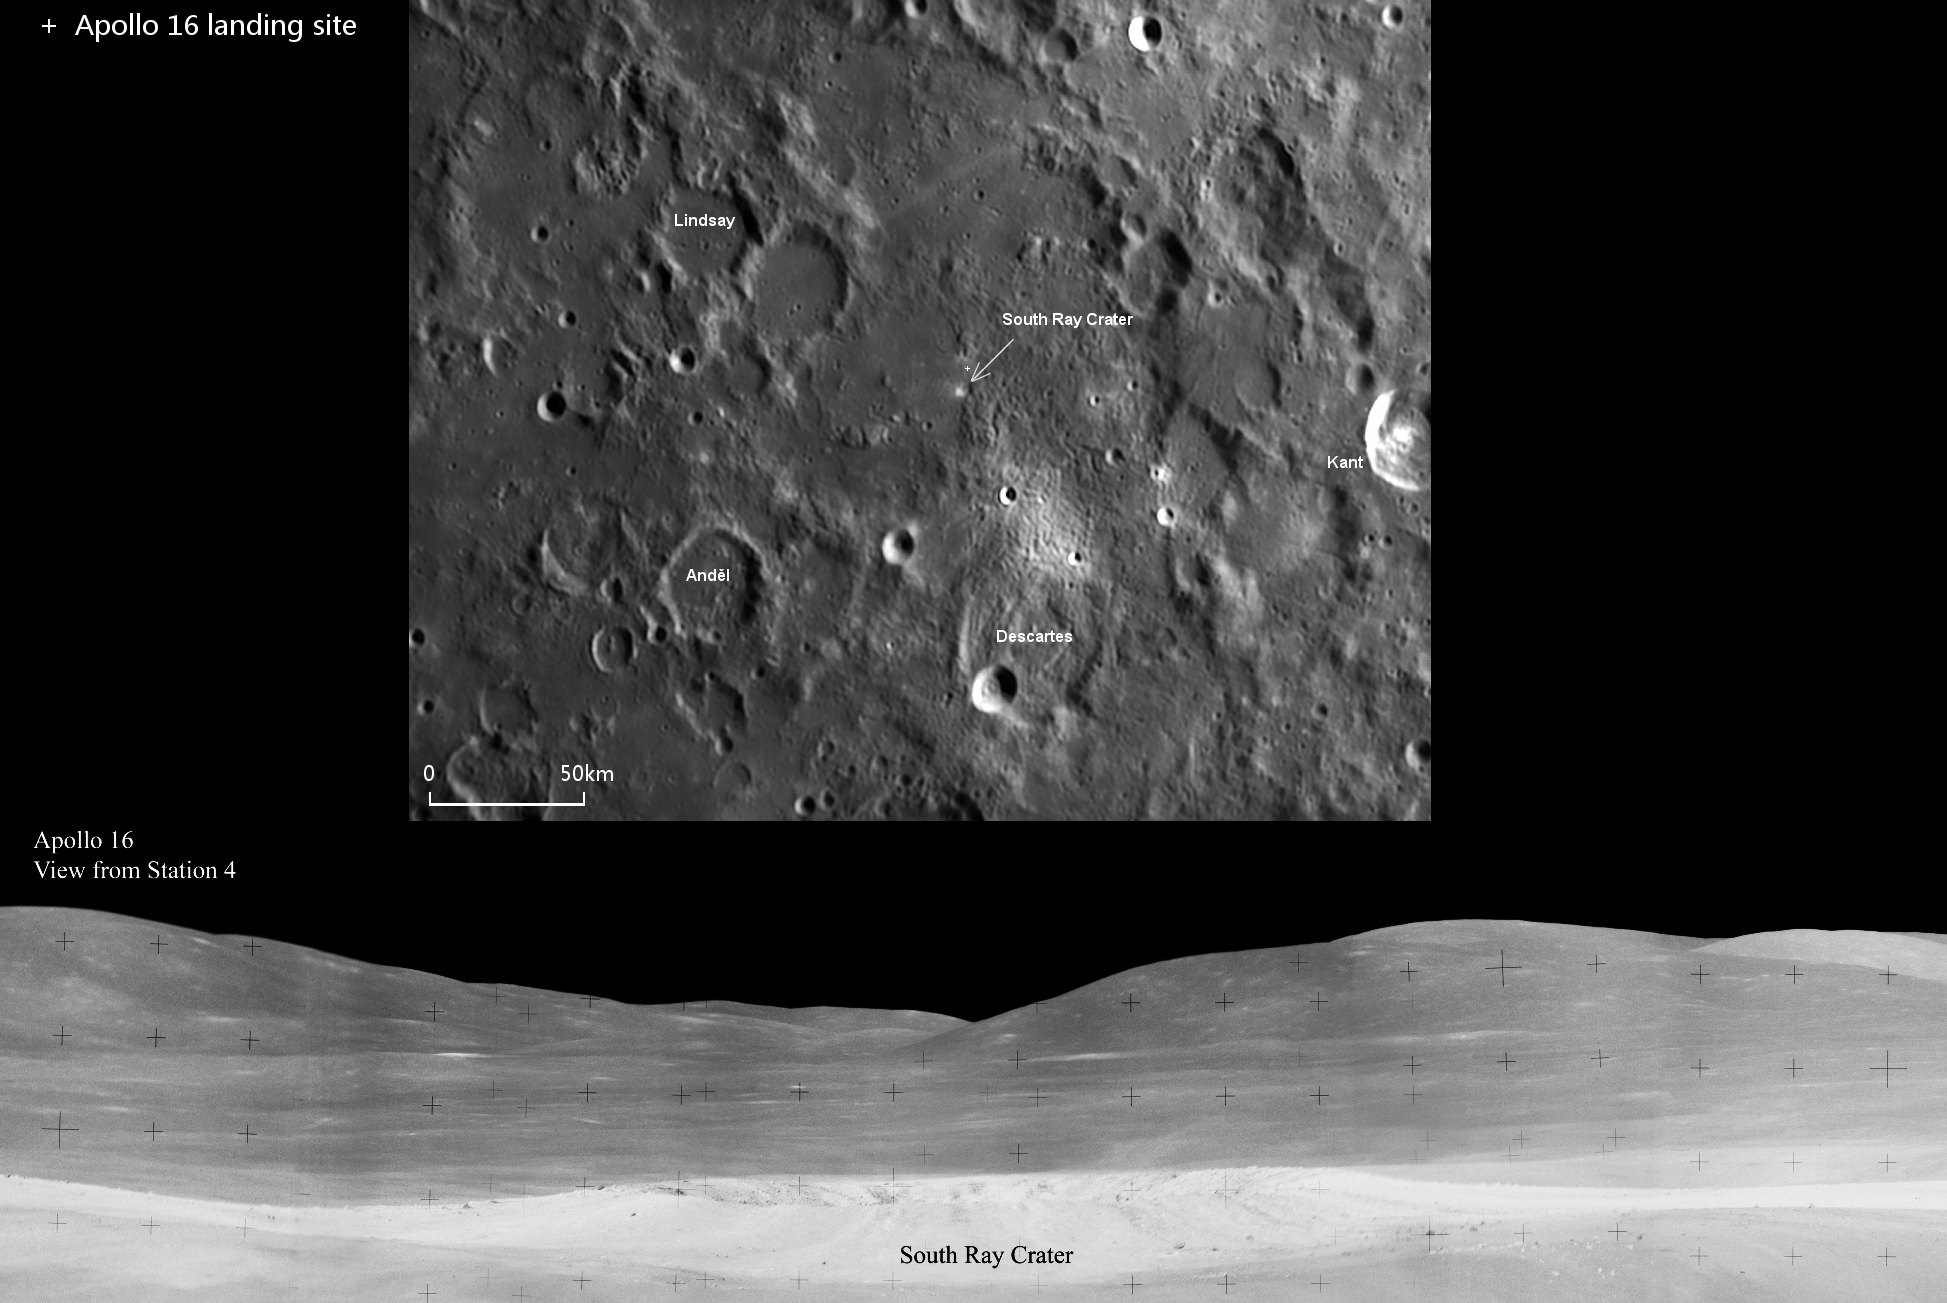 South Ray Crater